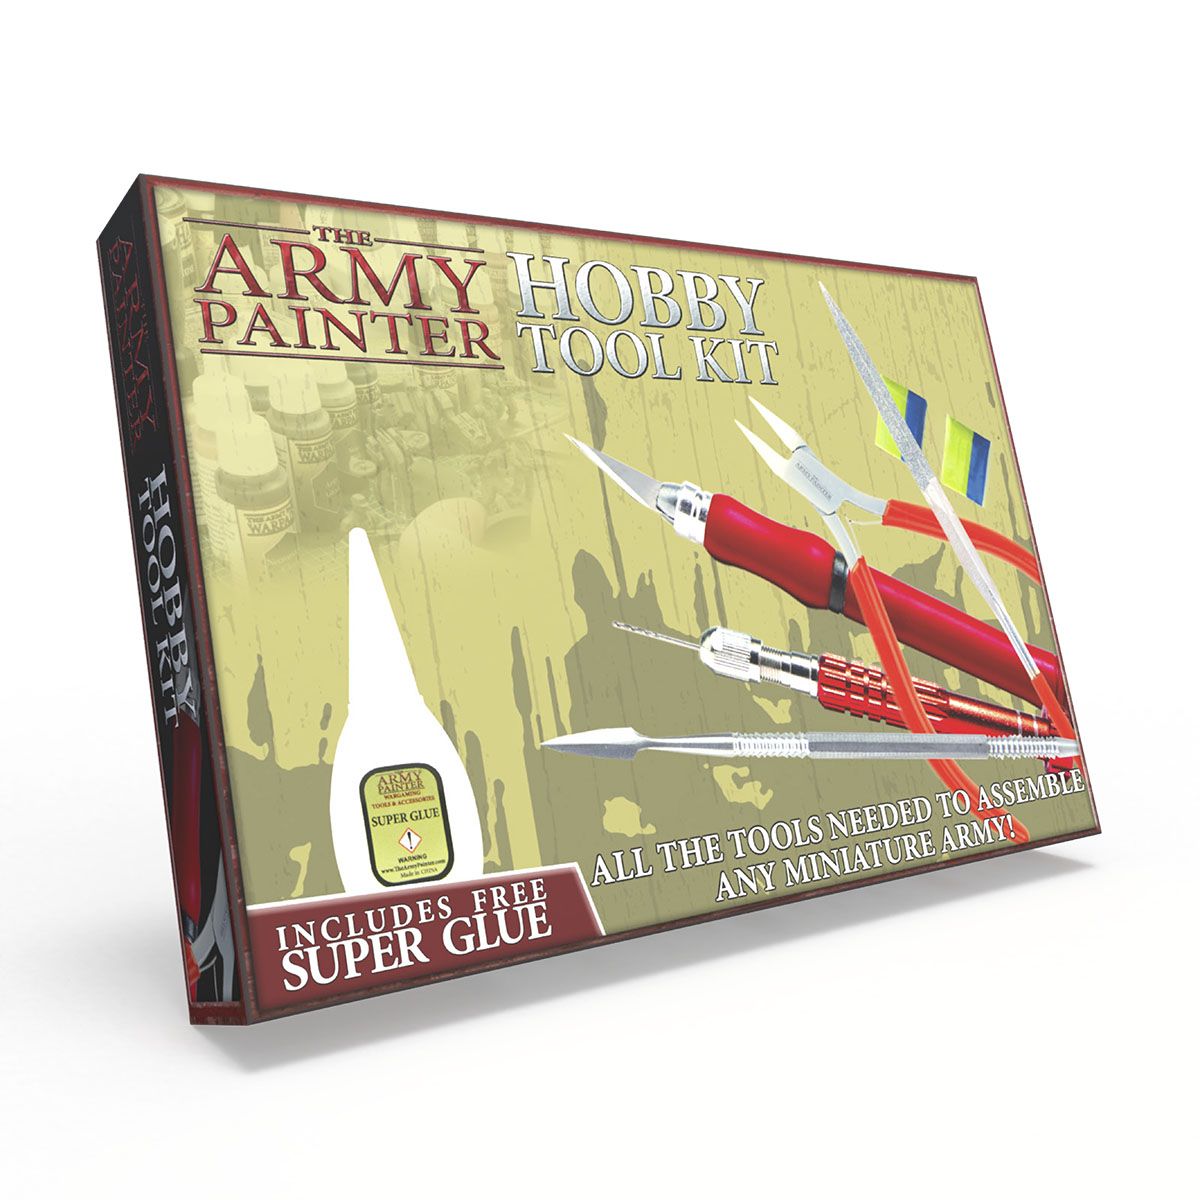 The Army Painter Hobby Tool Kit | RetroPlay Games